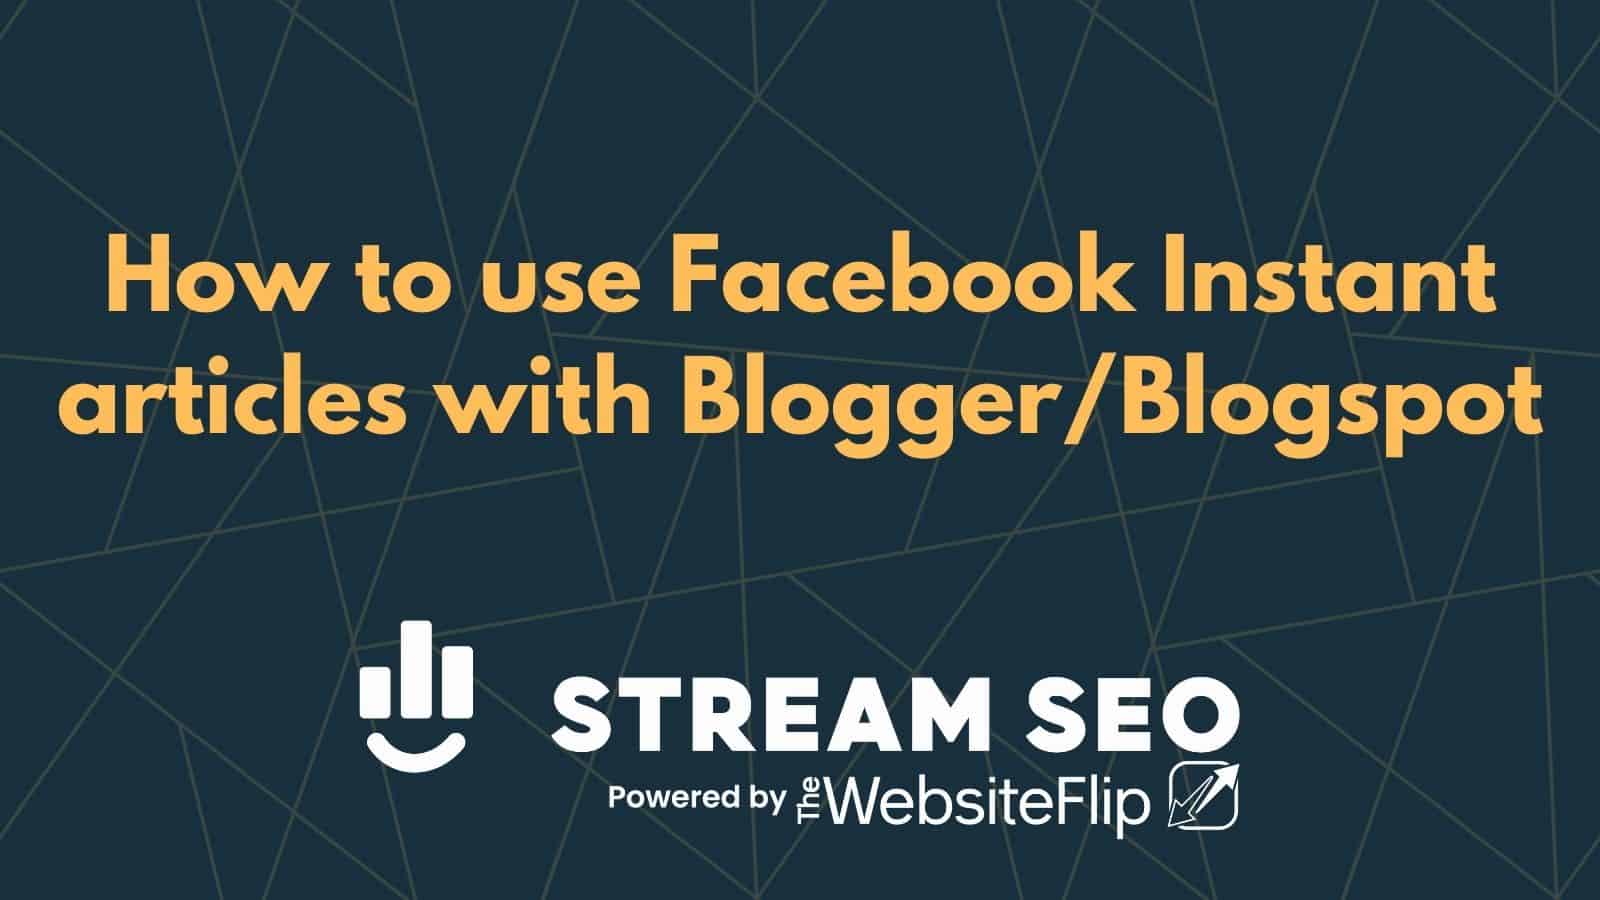 How to use Facebook Instant articles with Blogger/Blogspot